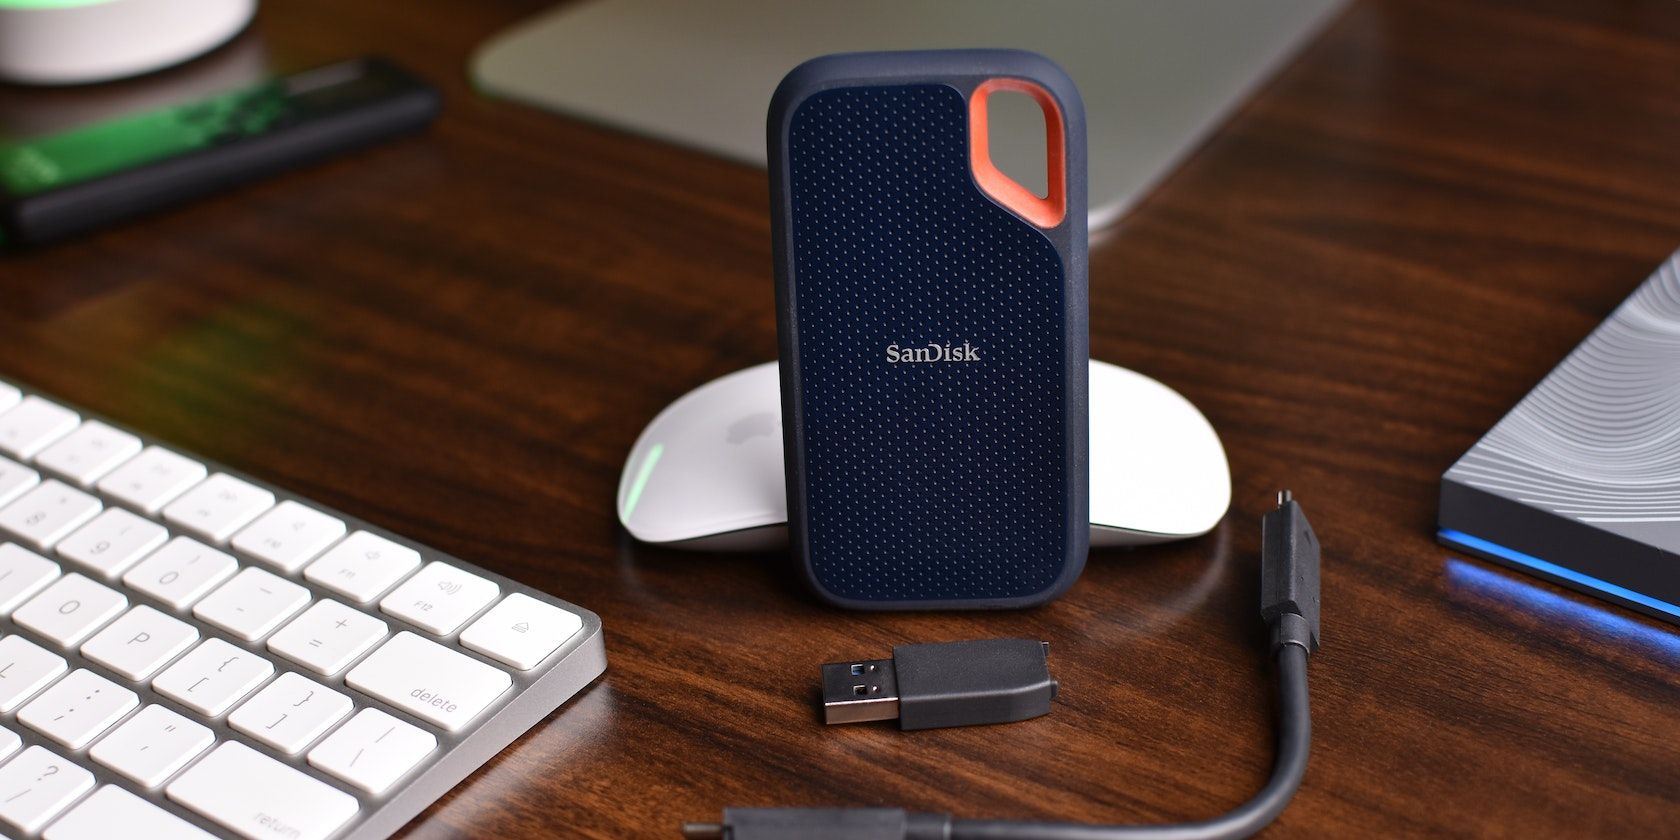 Sandisk SSD beside a USB drive, a cable, an Apple mouse, and a Magic Keyboard